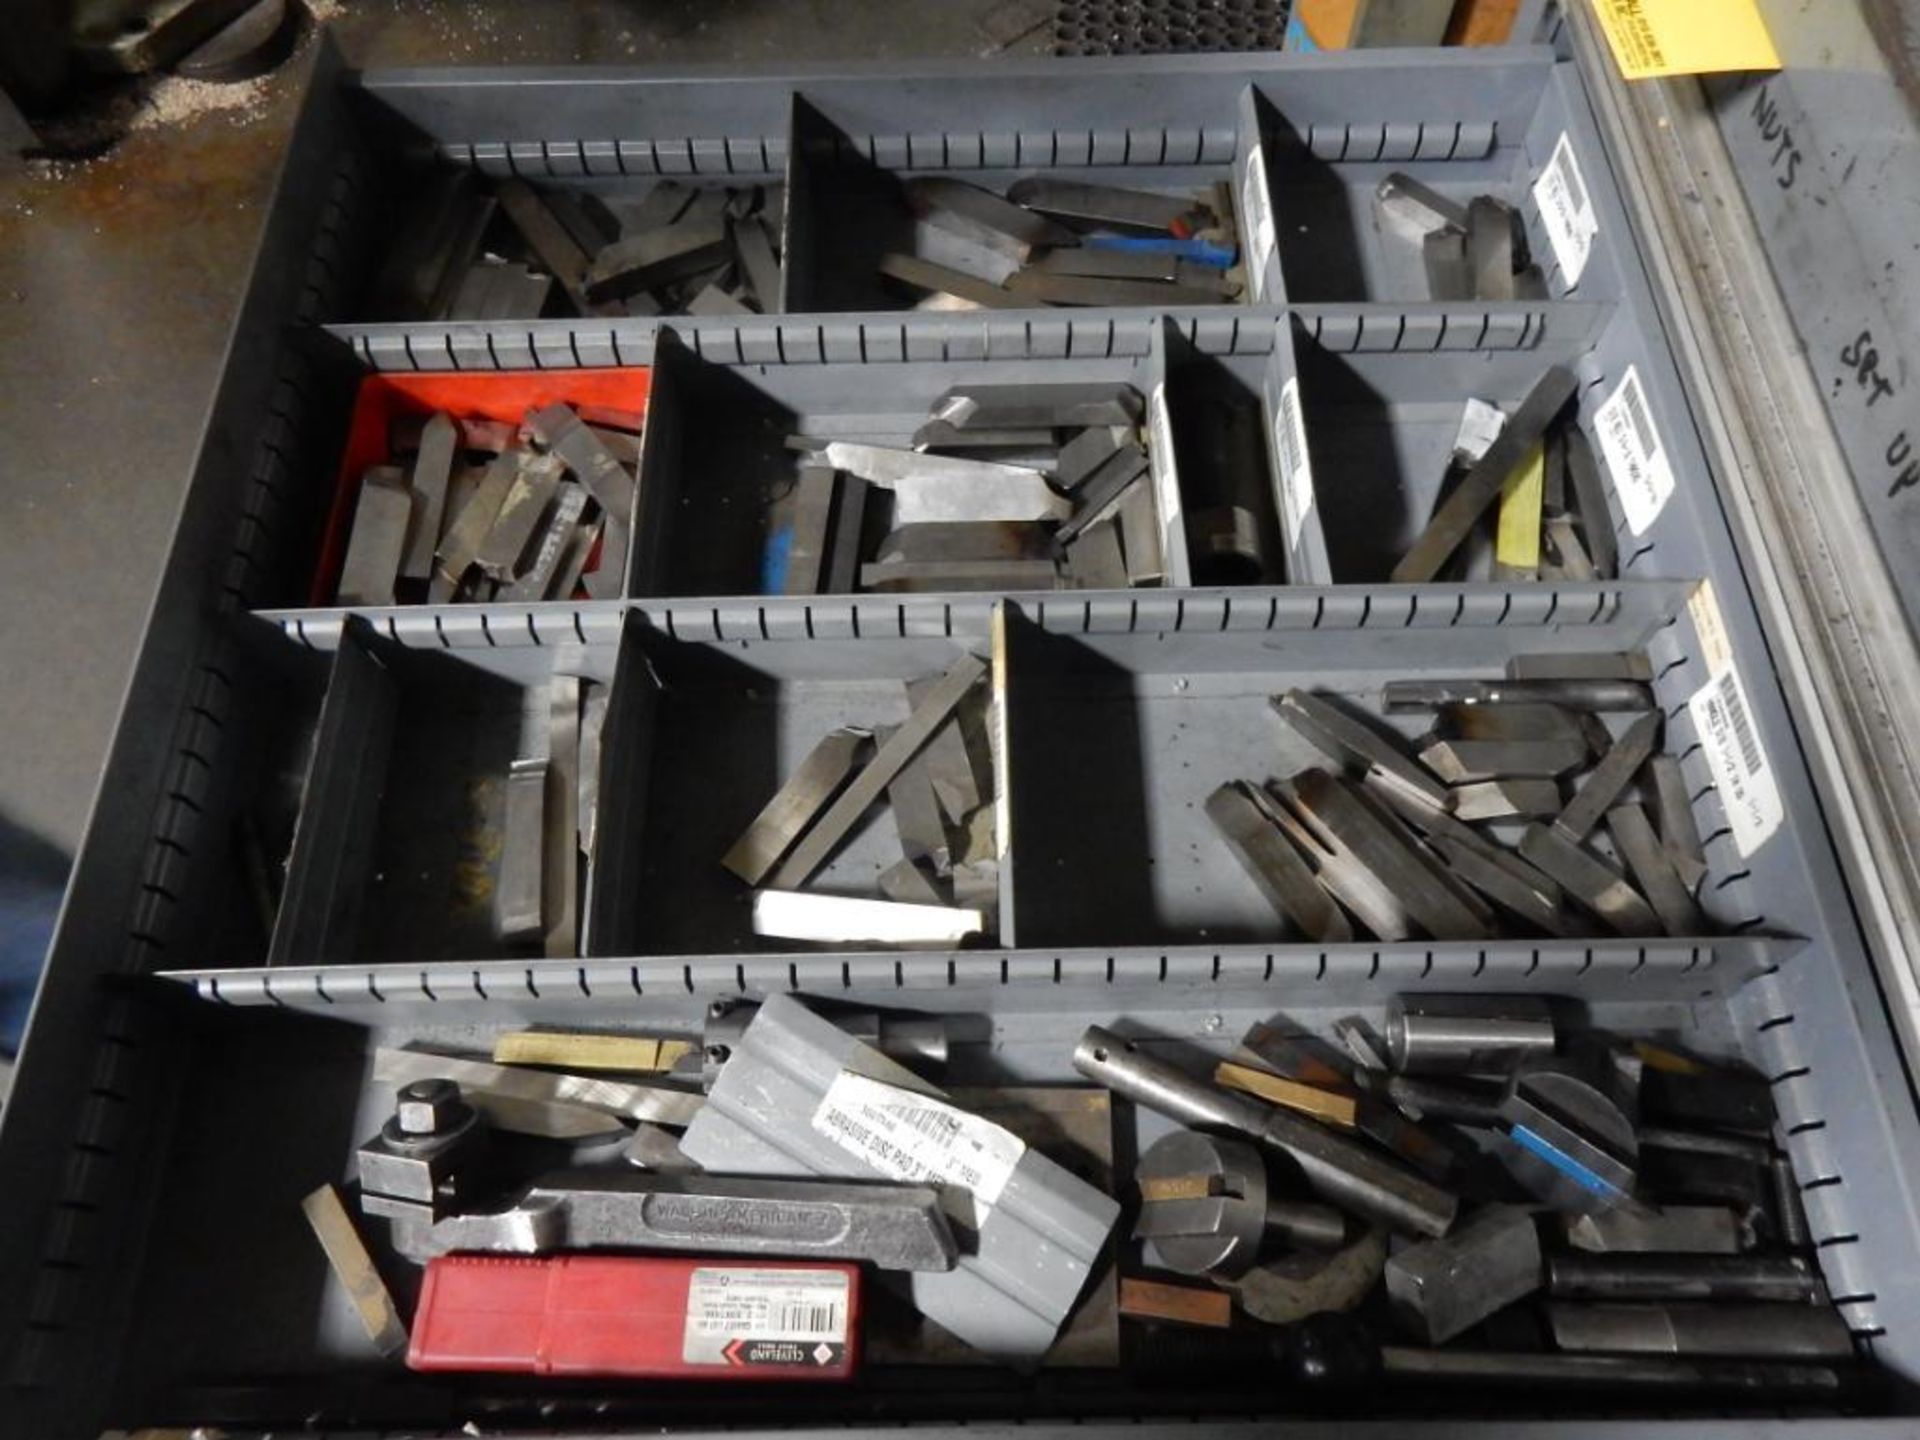 8-DRAWER TOOL CABINET - HOLD DOWN CLAMPS, CUTTING TOOLS, STOPS, BLOCKS, ETC. - Image 3 of 9